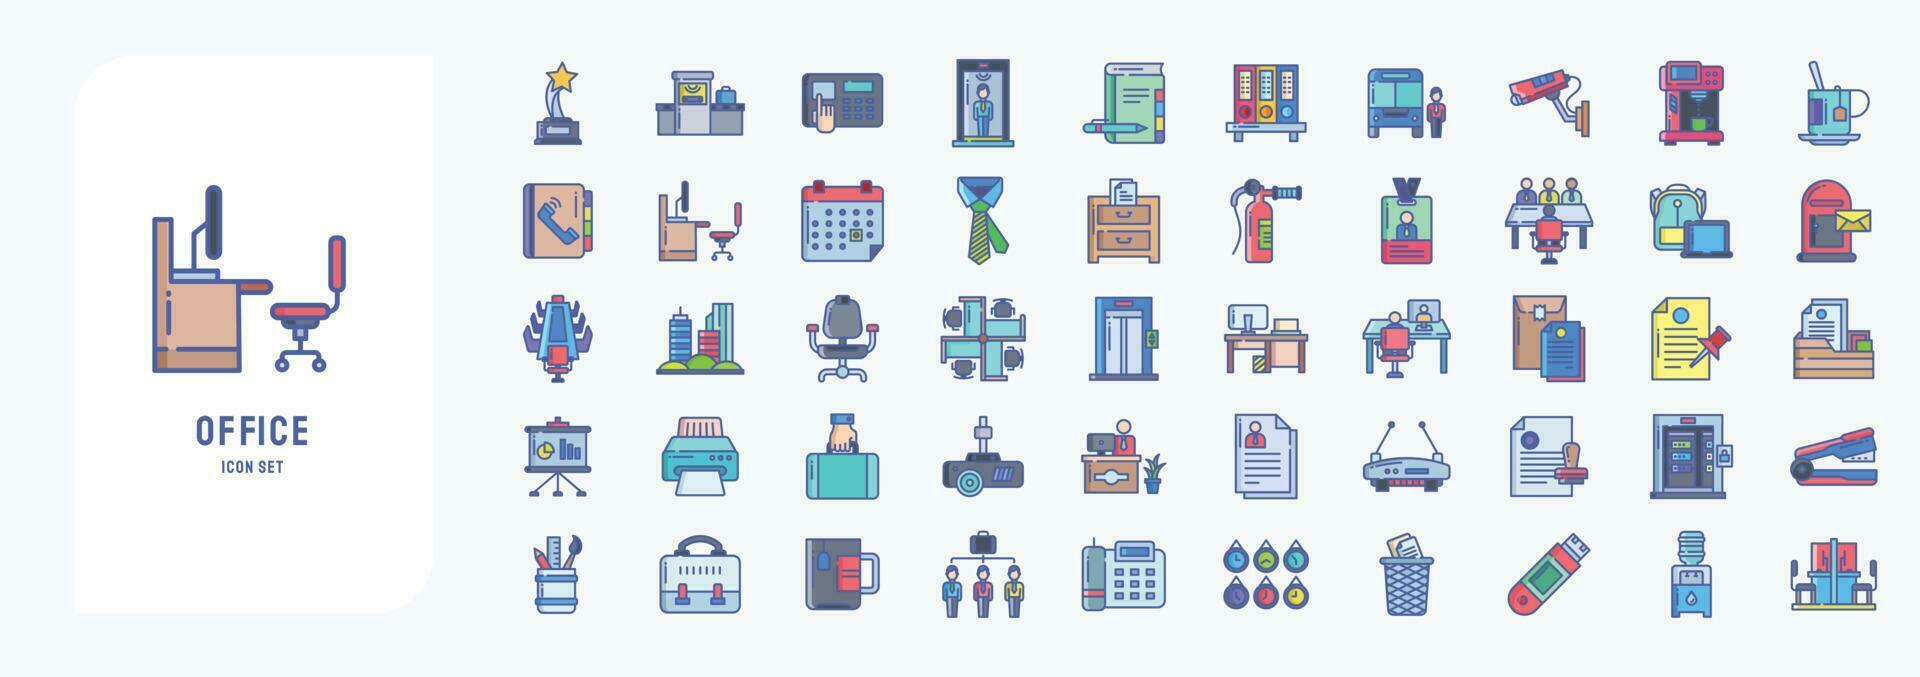 Office, including icon set.  icons like Tea, Team, Telephone, Time, and more vector